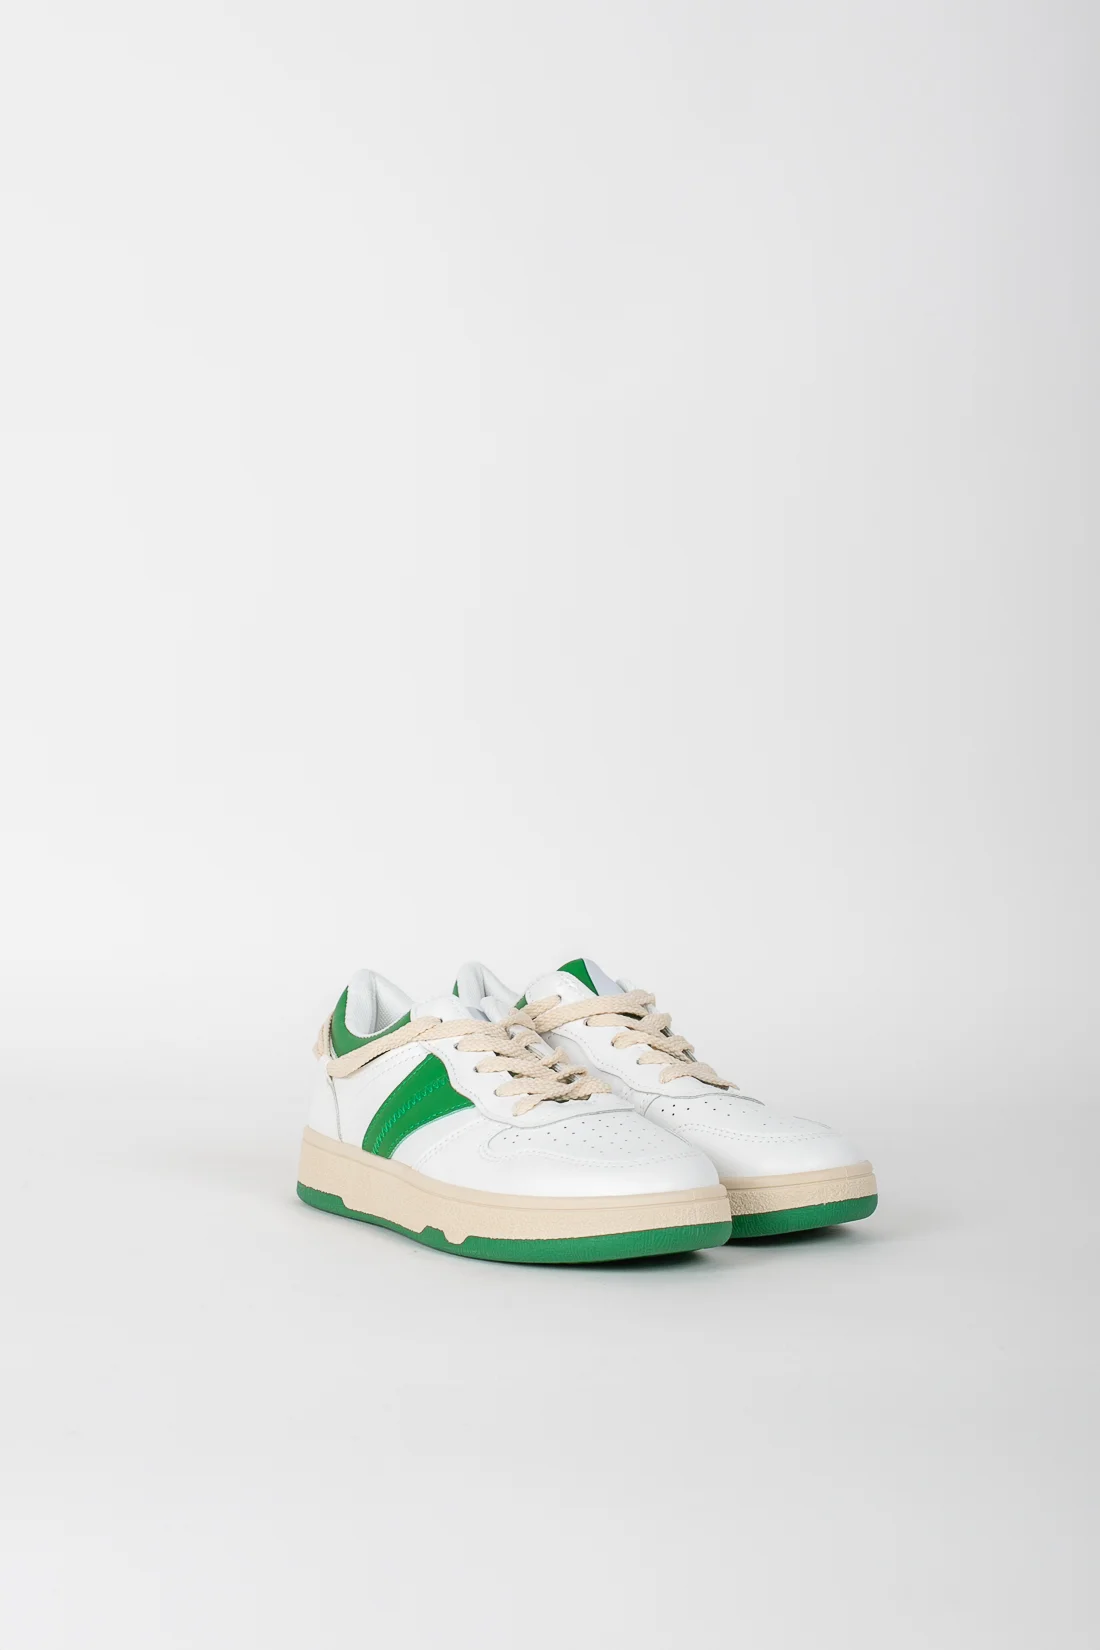 ISUR CASUAL SNEAKERS - GREEN